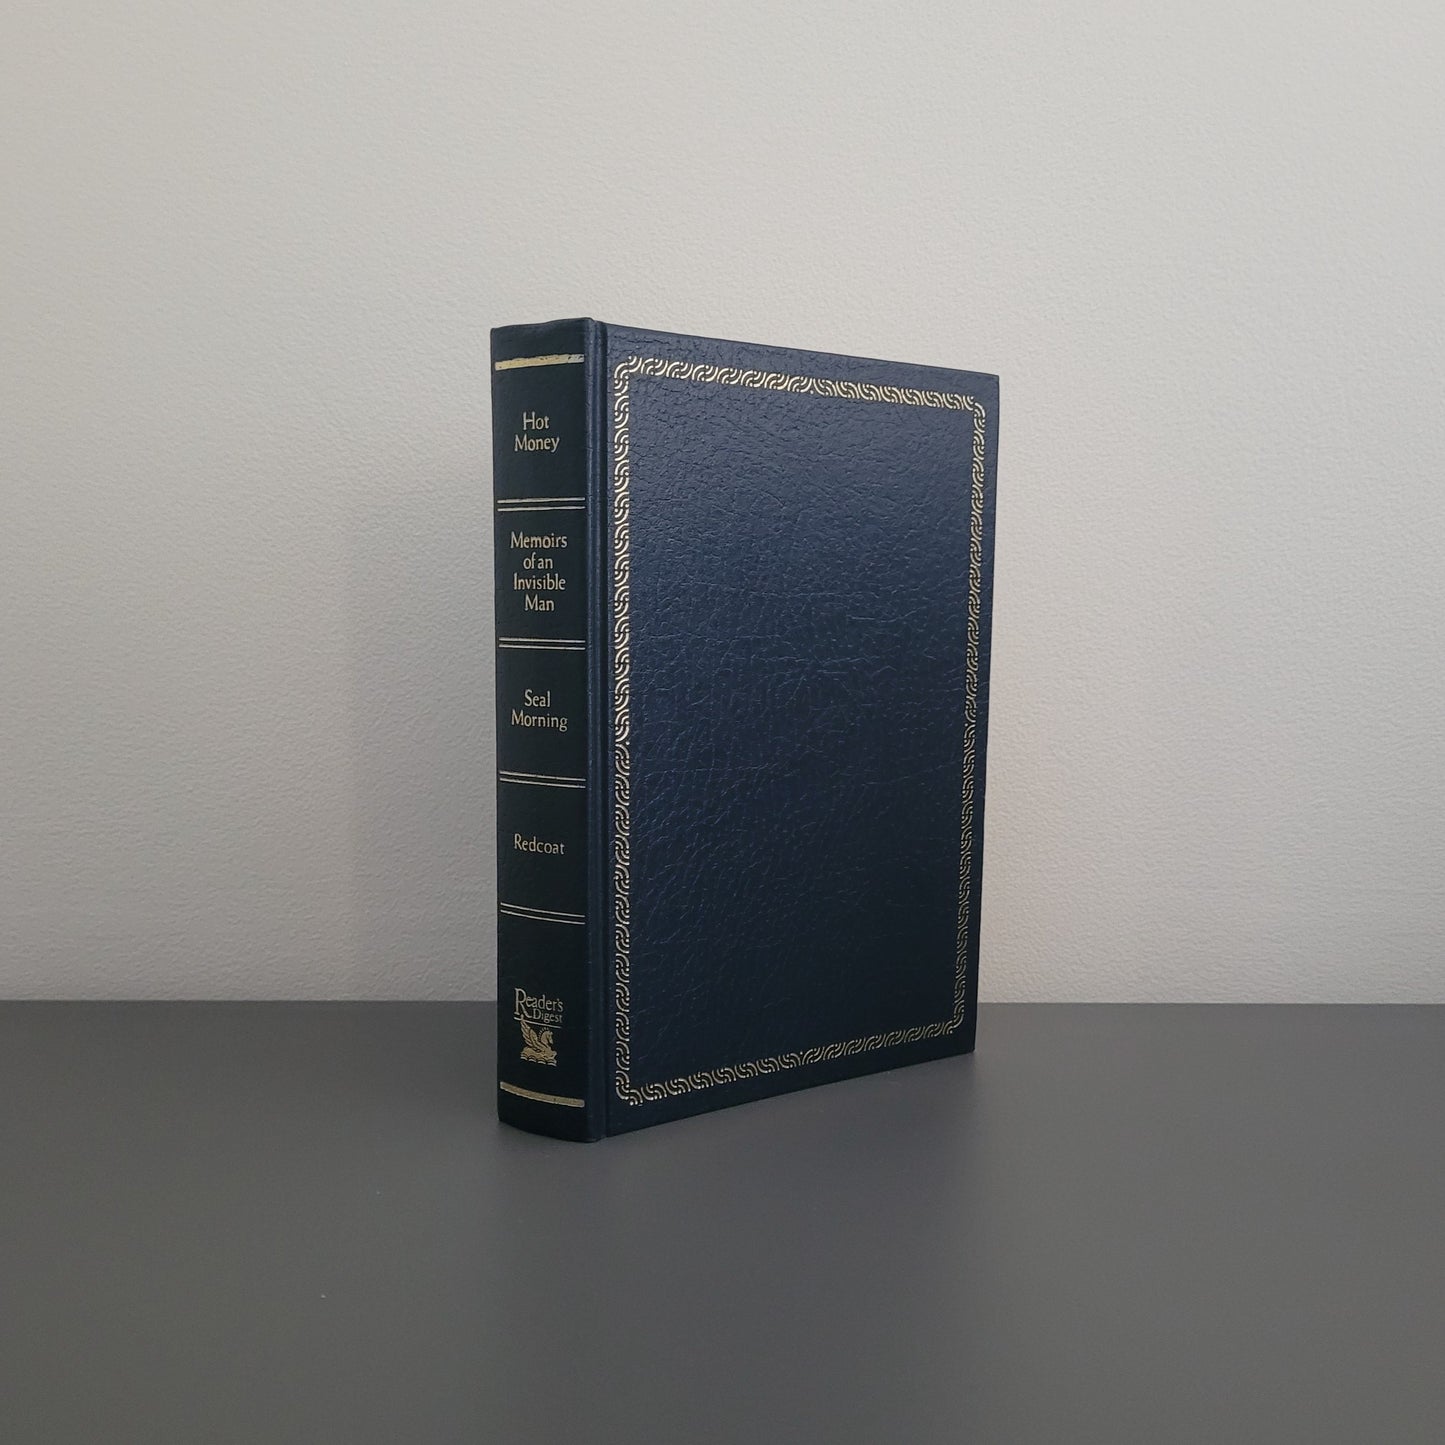 A picture of the front of the book fold - a hardback dark blue book, with a gold border.